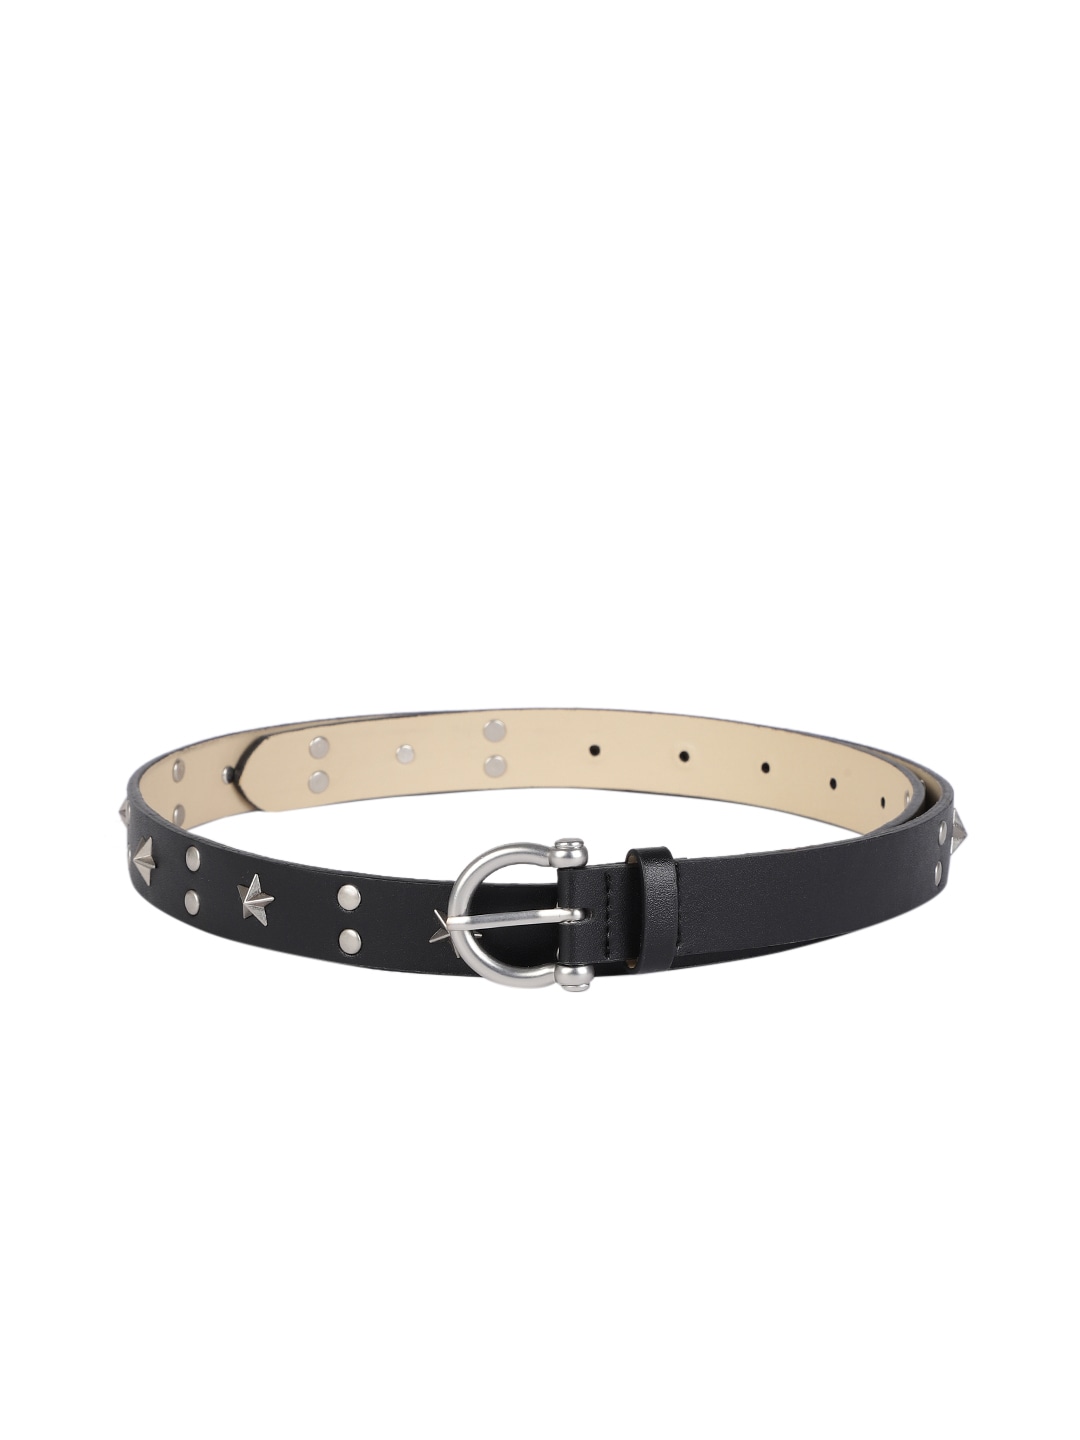 The Roadster Lifestyle Co Women Black Studded Belt Price in India